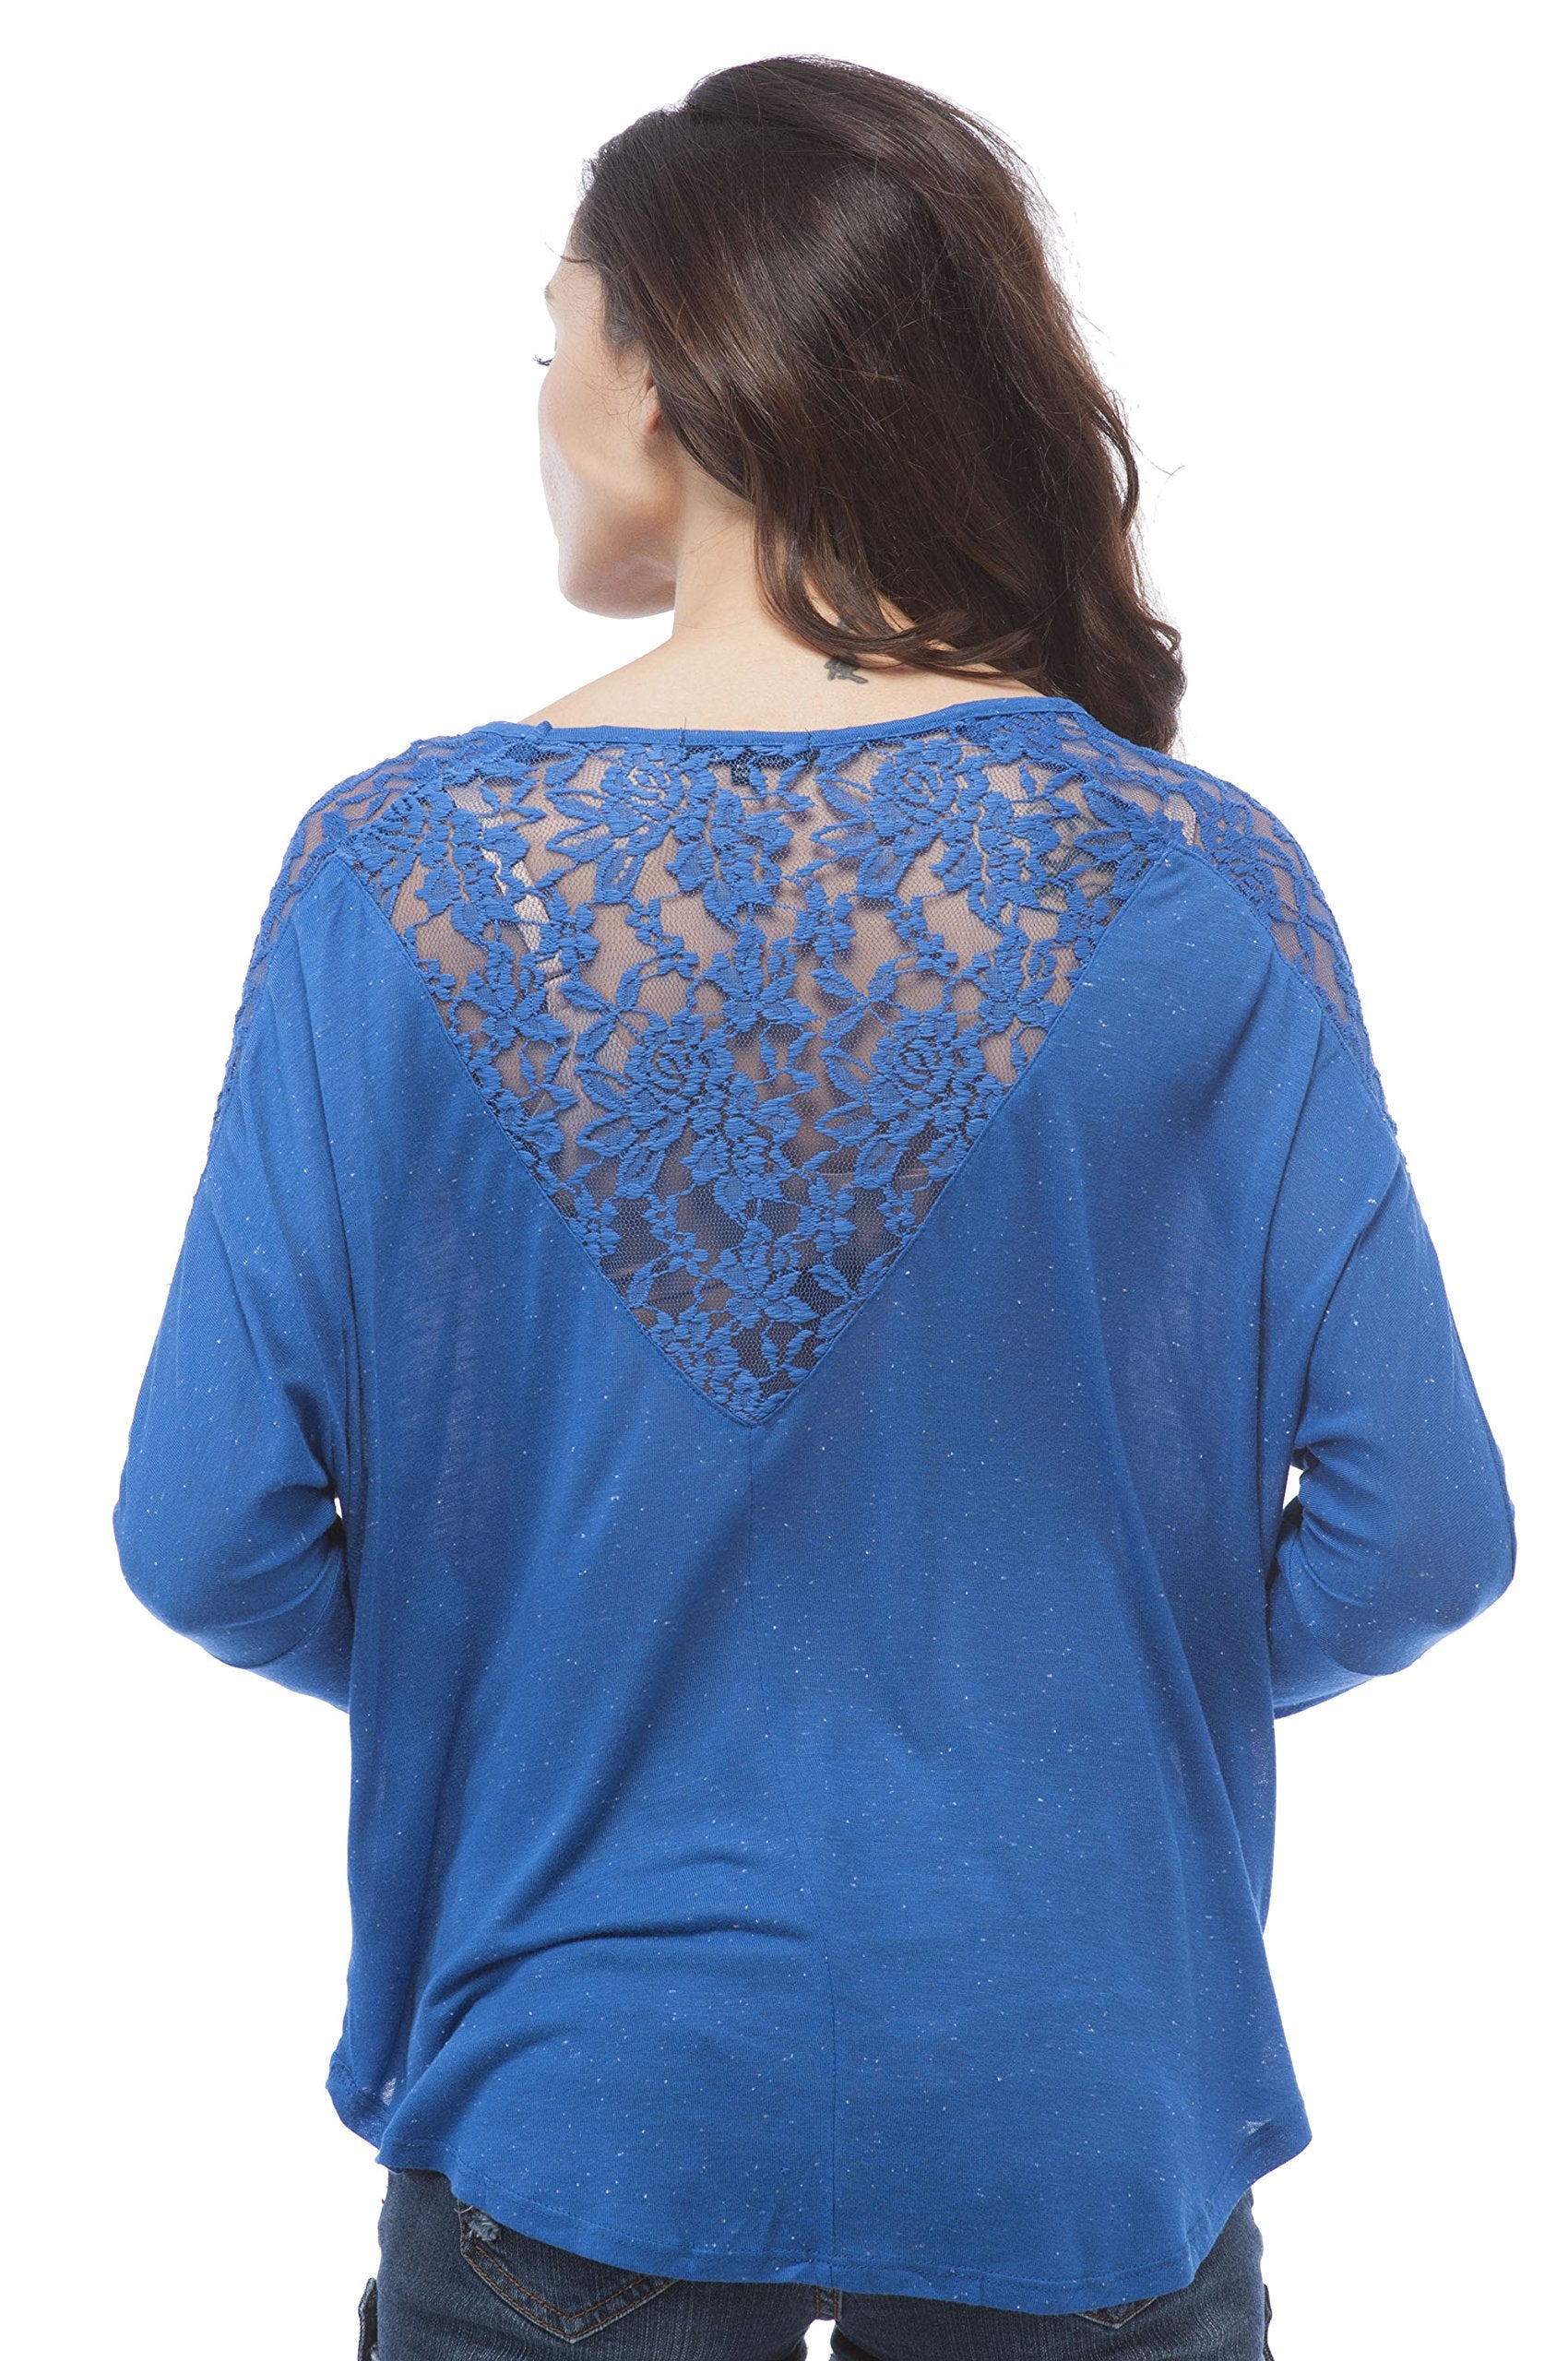 Long Sleeve Batwing V Neck Lace Trim Top